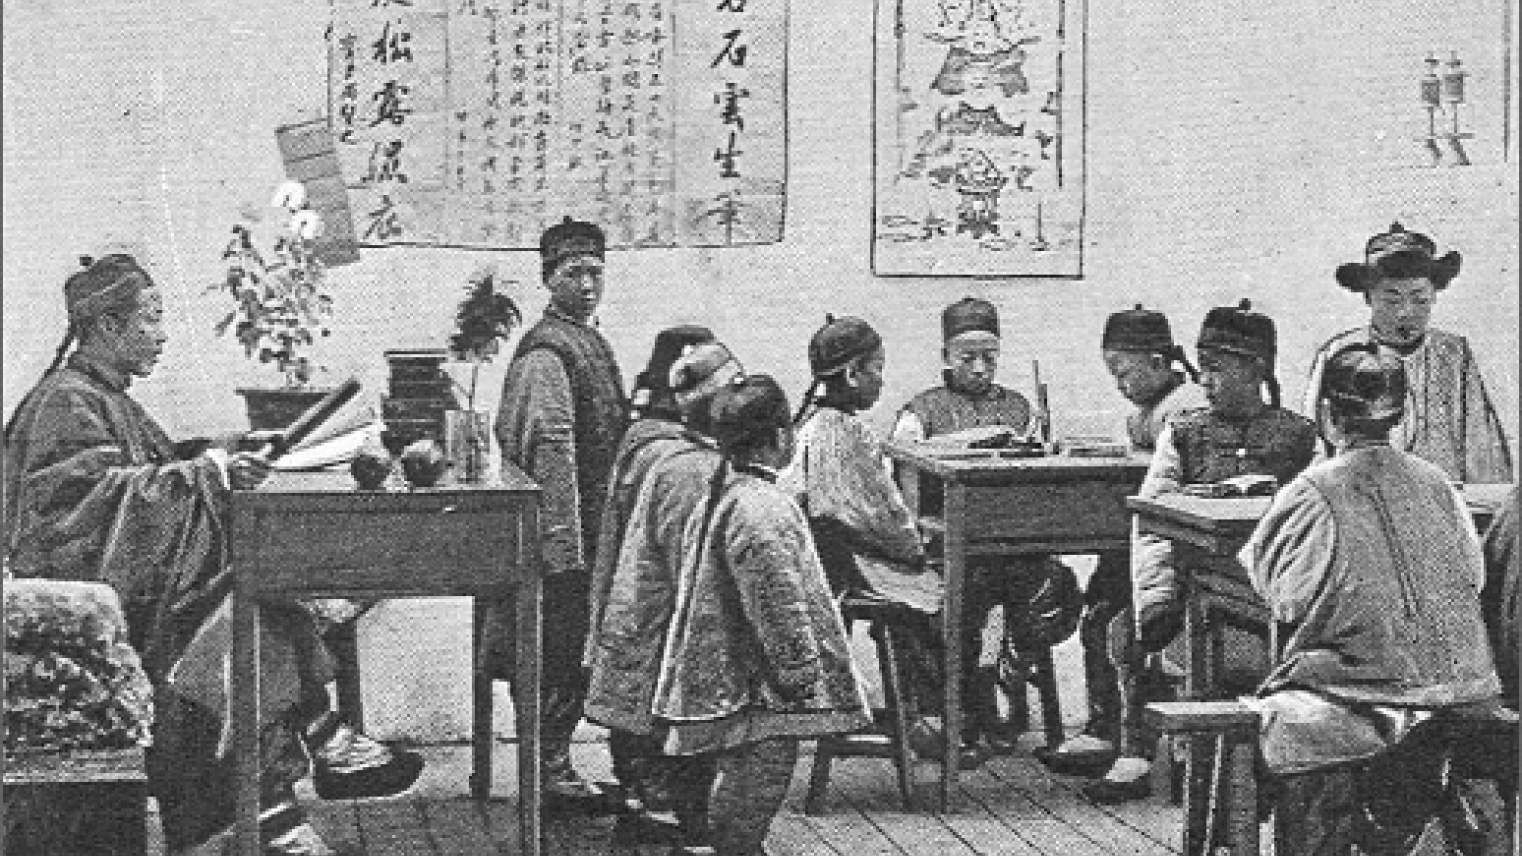 Qing school classroom with students, teacher and posters on the wall